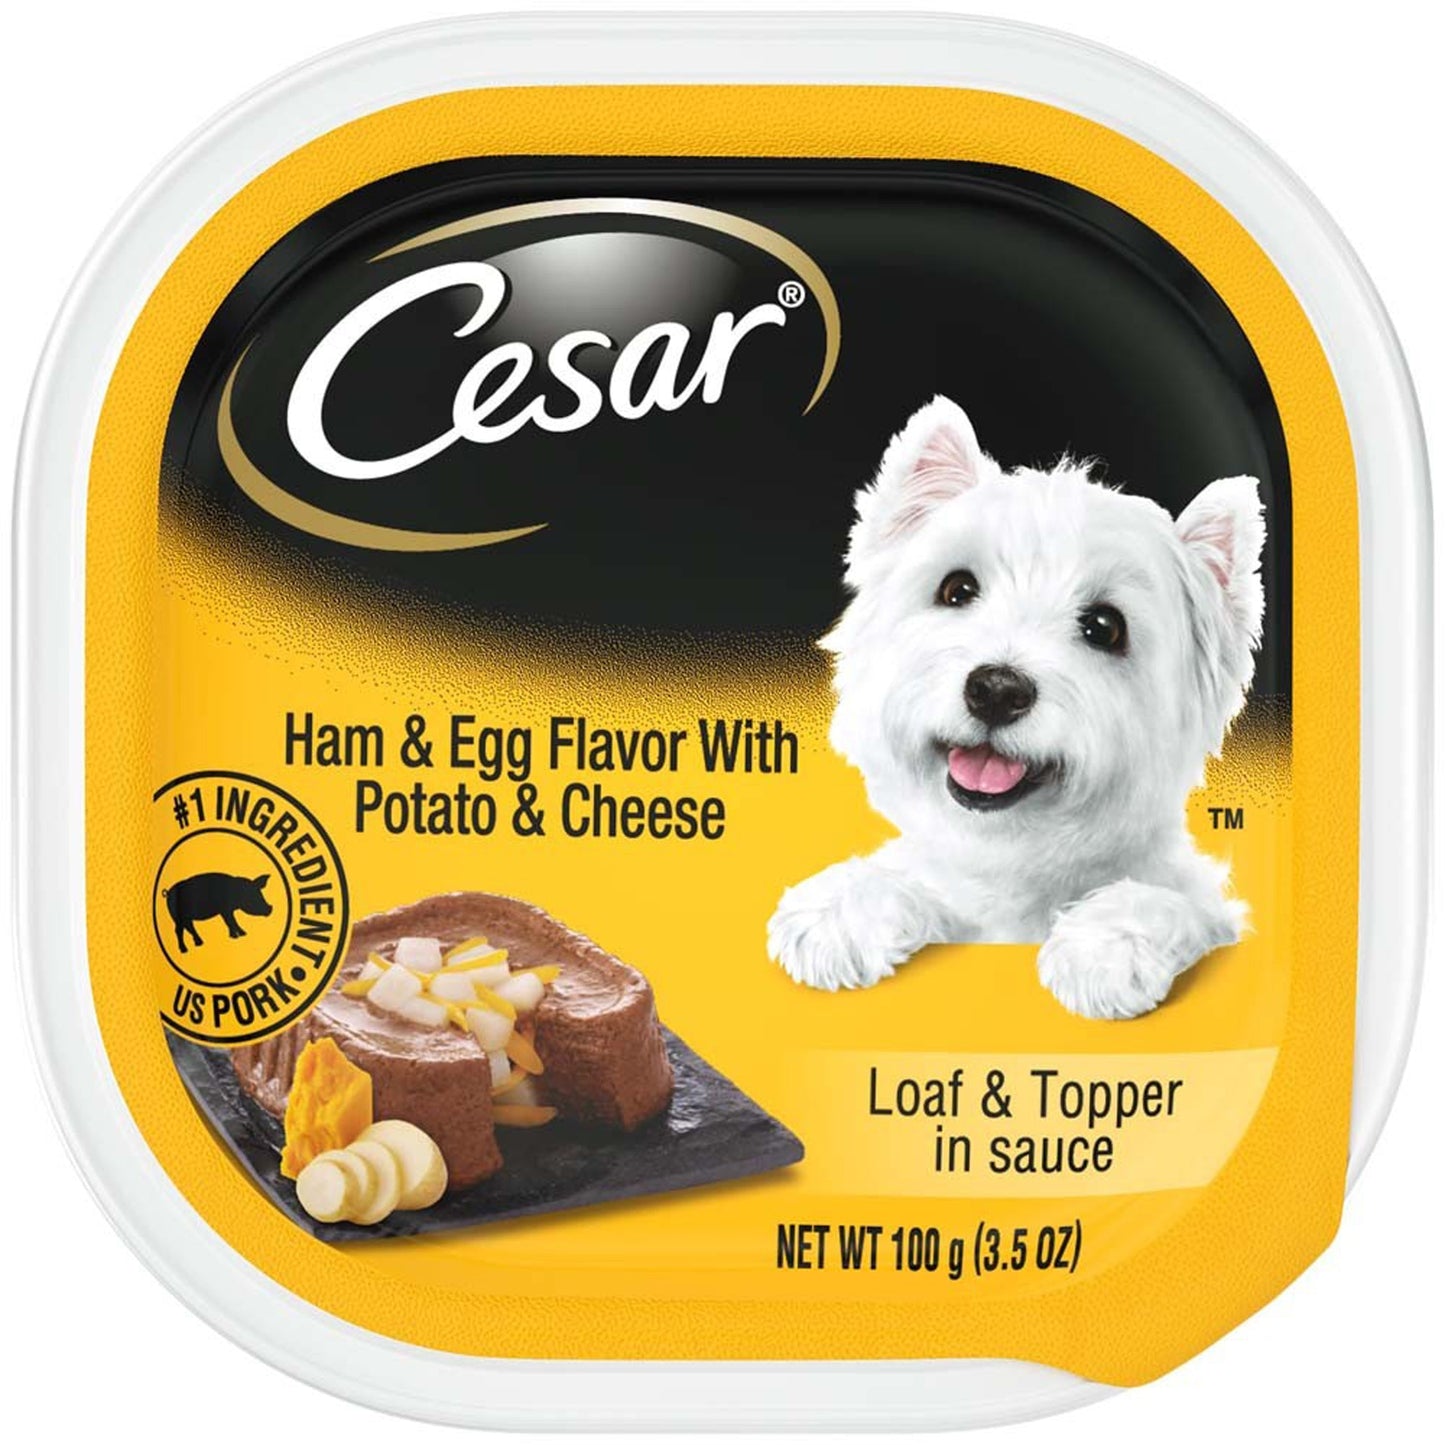 Cesar Loaf & Topper in Sauce Adult Wet Dog Food Ham & Egg w/Potato & Cheese 3.5oz. (Case of 24)